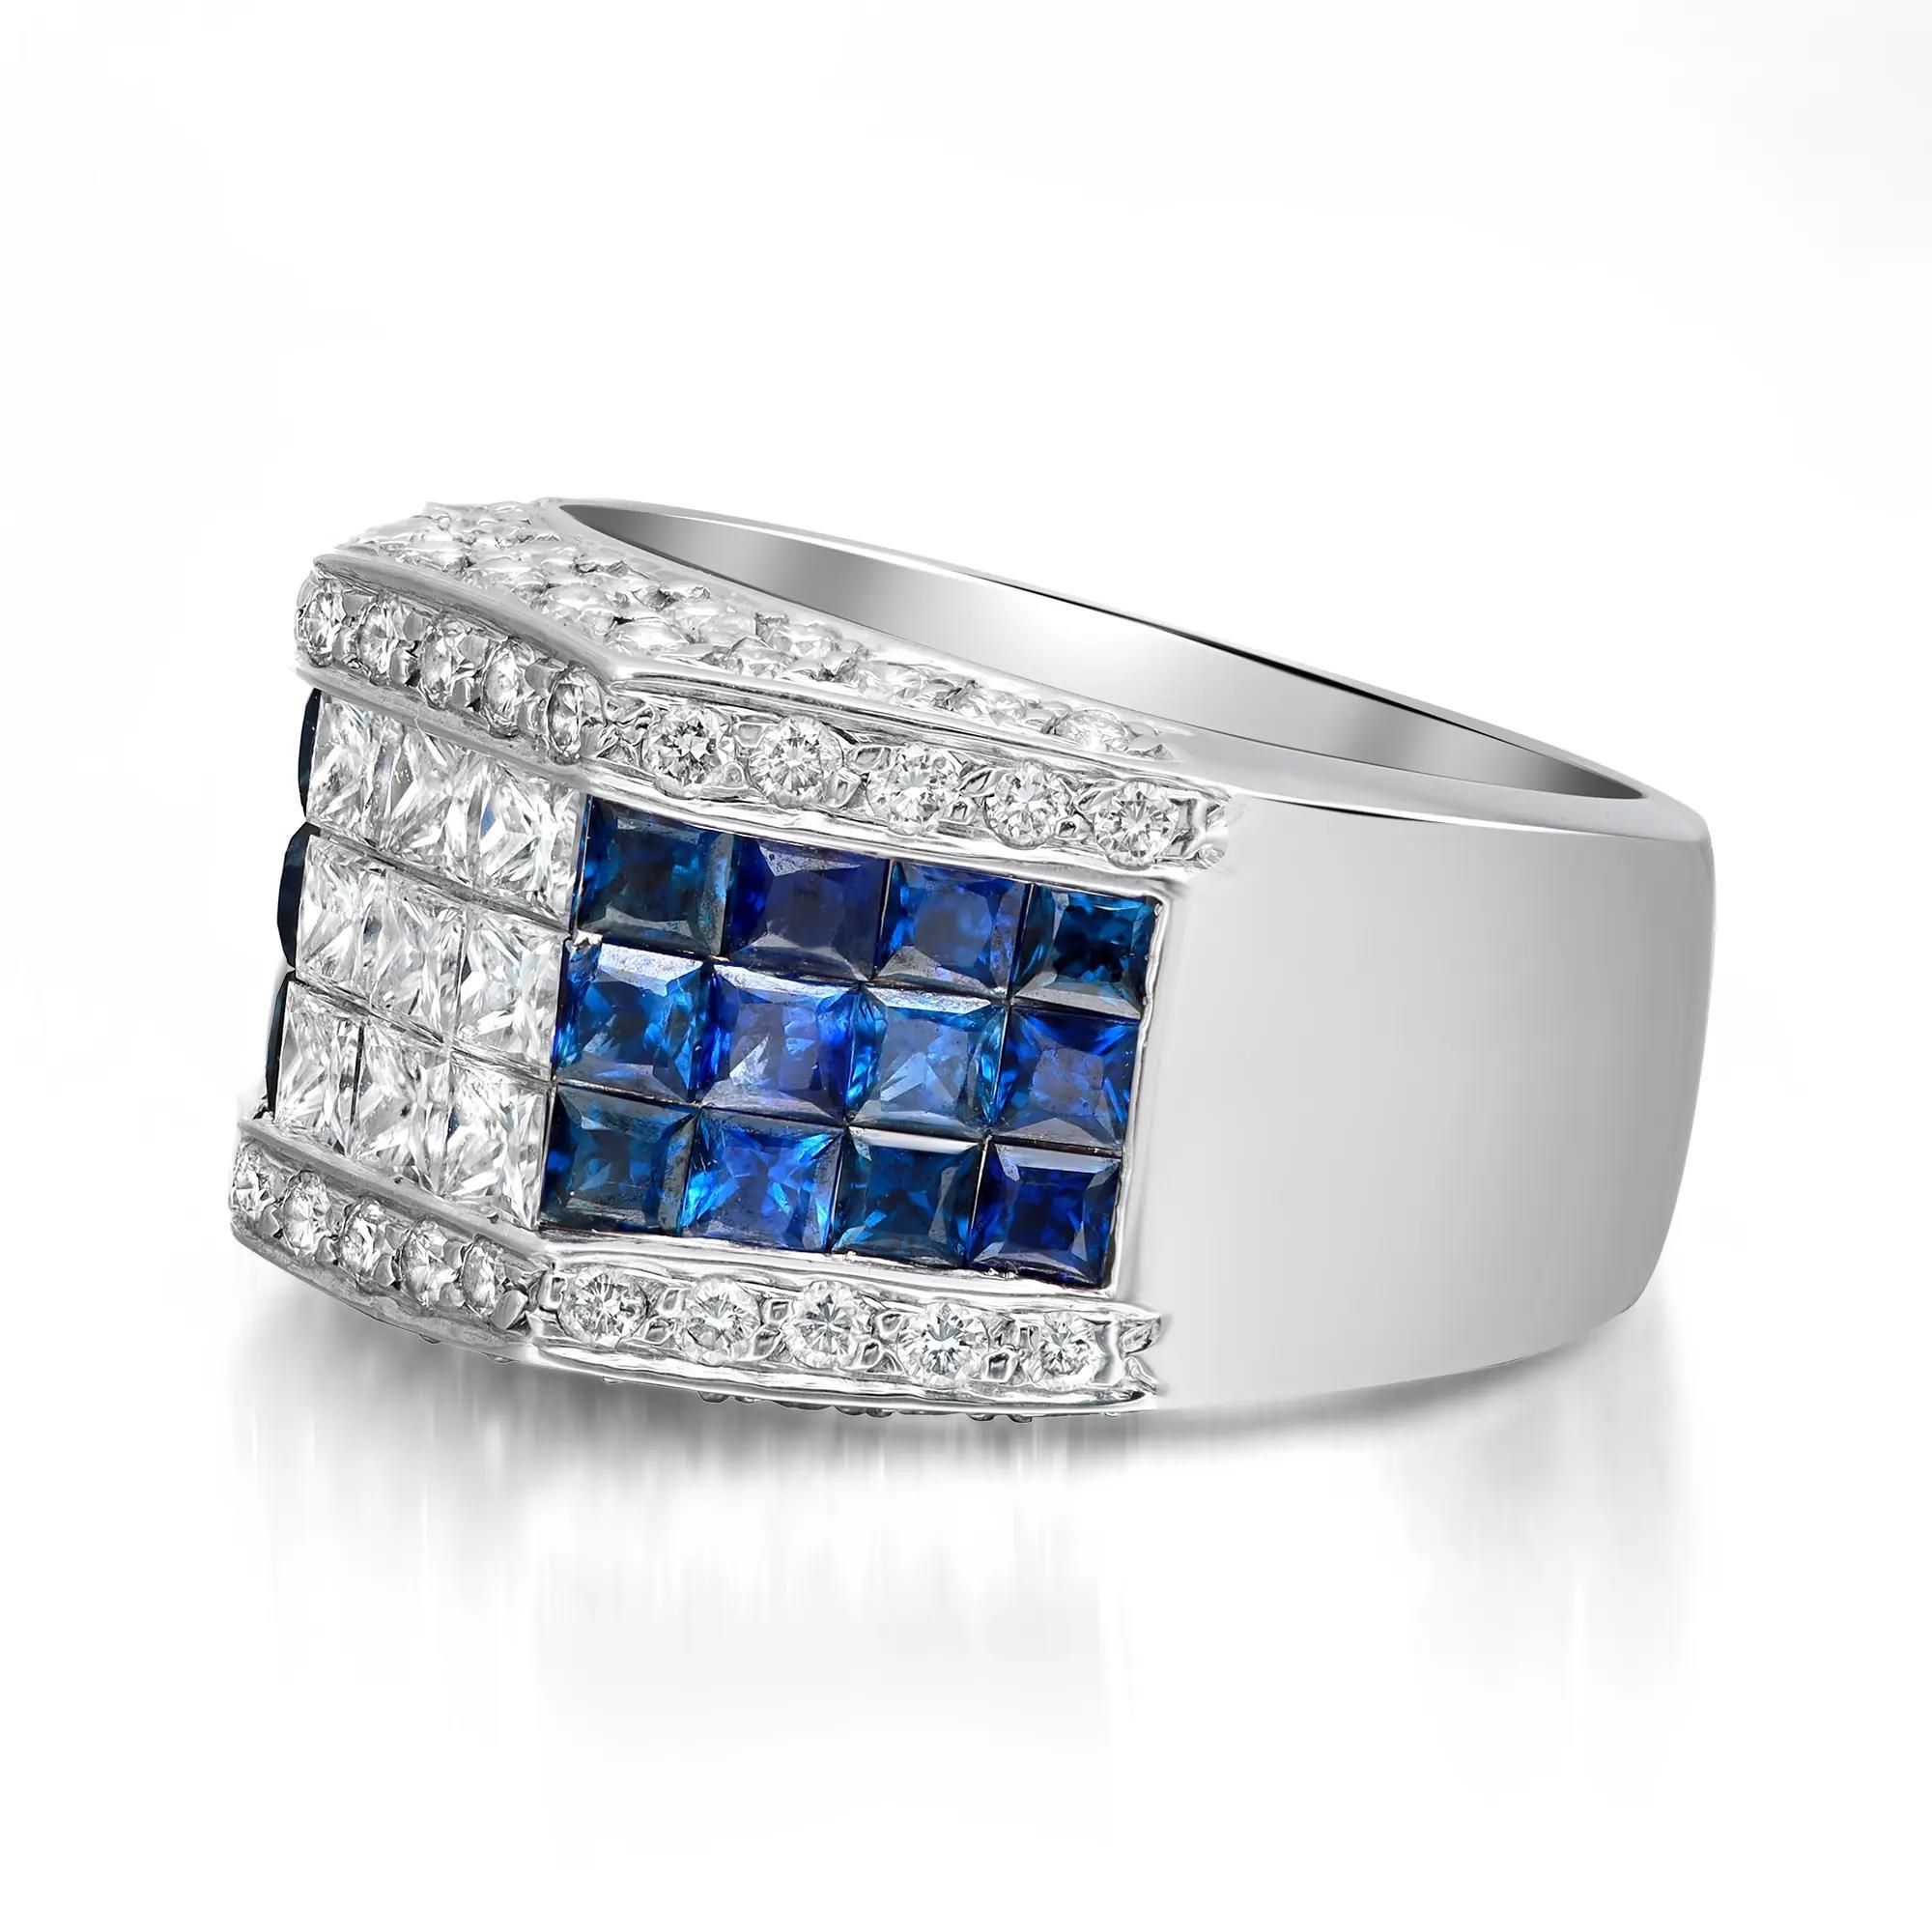 1.09Ctw Diamond & 1.20Ctw Blue Sapphire Cocktail Ring 18K White Gold Size 7 In Excellent Condition For Sale In New York, NY